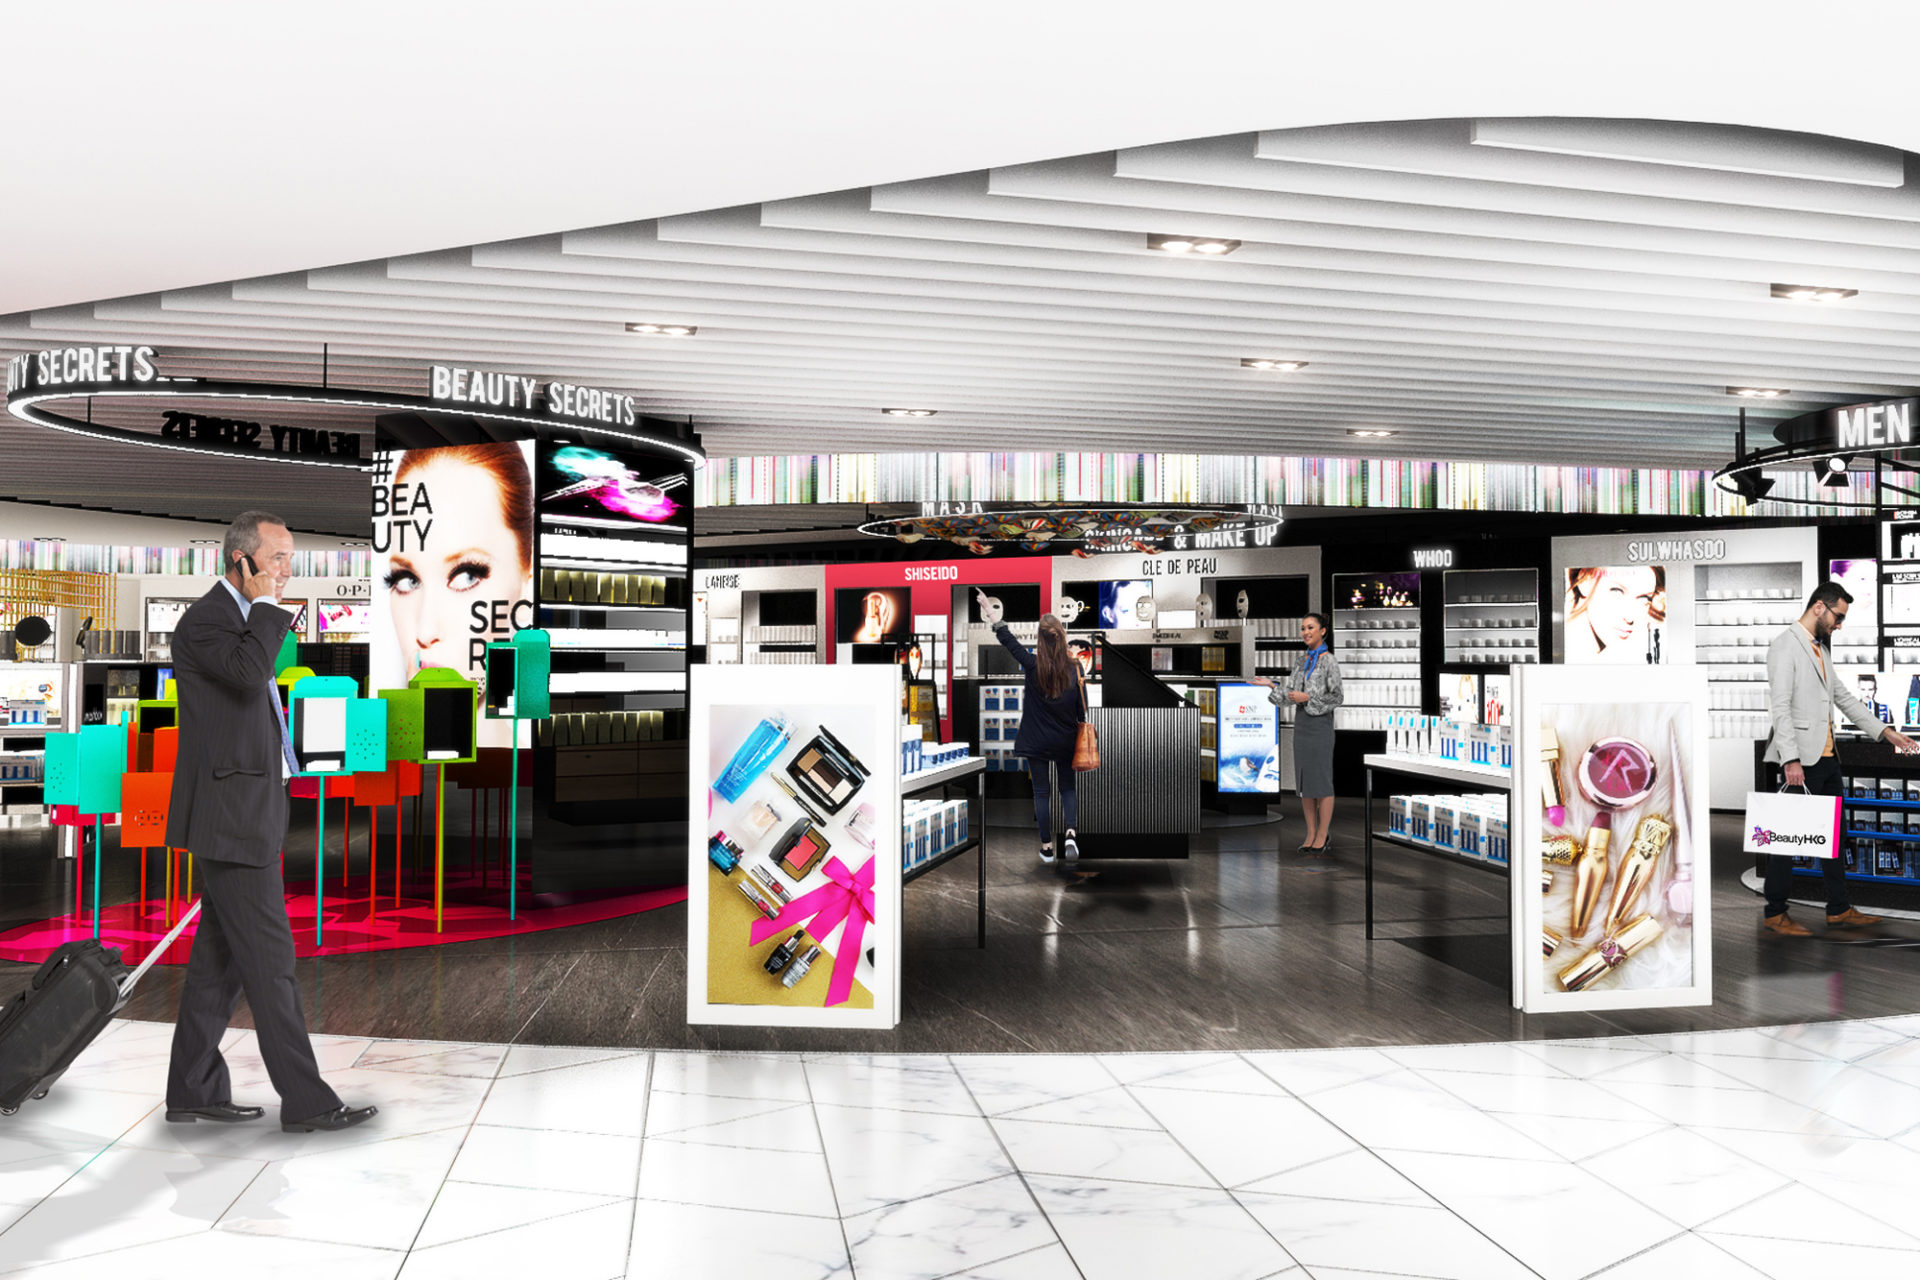 creative design and brand activation at Jong Kon airport by Altavia Travel Retail